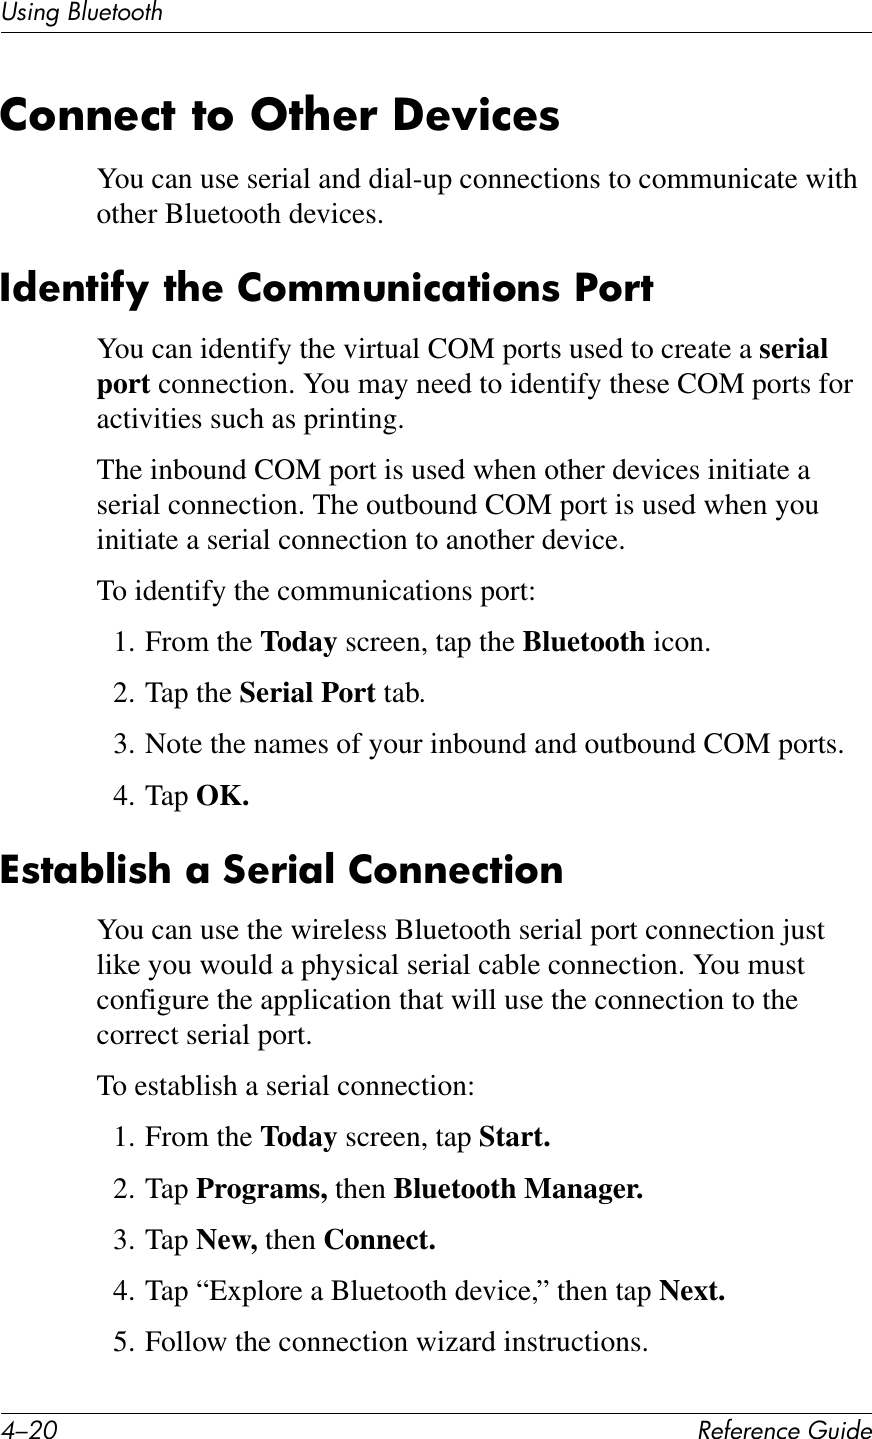 C/0I !&quot;#&quot;$&quot;%&amp;&quot;&apos;()*+&quot;UL*%2&apos;PK)&quot;1771Q26$$&quot;%7&amp;76&amp;57?&quot;!&amp;U&quot;N)%&quot;8You can use serial and dial-up connections to communicate with other Bluetooth devices./*&quot;$7)#O&amp;7?&quot;&amp;26II($)%;7)6$8&amp;S6!7You can identify the virtual COM ports used to create a serial port connection. You may need to identify these COM ports for activities such as printing.The inbound COM port is used when other devices initiate a serial connection. The outbound COM port is used when you initiate a serial connection to another device.To identify the communications port:1. From the Today screen, tap the Bluetooth icon.2. Tap the Serial Port tab.3. Note the names of your inbound and outbound COM ports.4. Tap OK.^87;W@)8?&amp;;&amp;:&quot;!);@&amp;26$$&quot;%7)6$You can use the wireless Bluetooth serial port connection just like you would a physical serial cable connection. You must configure the application that will use the connection to the correct serial port.To establish a serial connection:1. From the Today screen, tap Start.2. Tap Programs, then Bluetooth Manager.3. Tap New, then Connect.4. Tap “Explore a Bluetooth device,” then tap Next.5. Follow the connection wizard instructions.